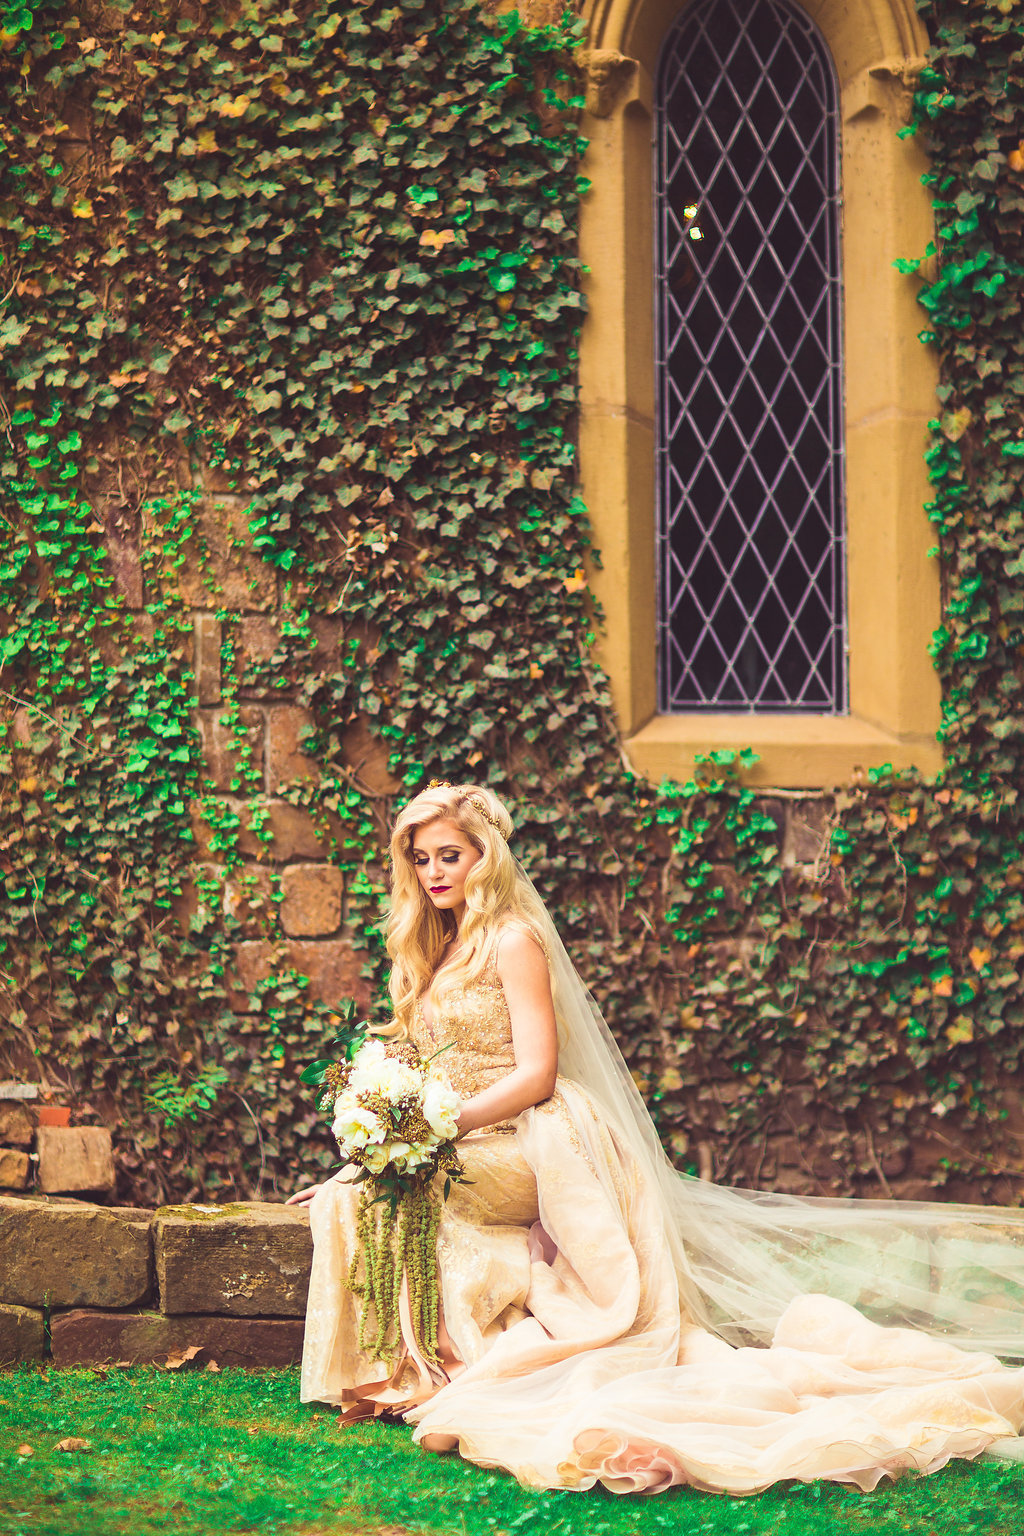 Wedding Photograph Of Bride Looking at Her Bouquet and  Sitting Beside a Window Los Angeles